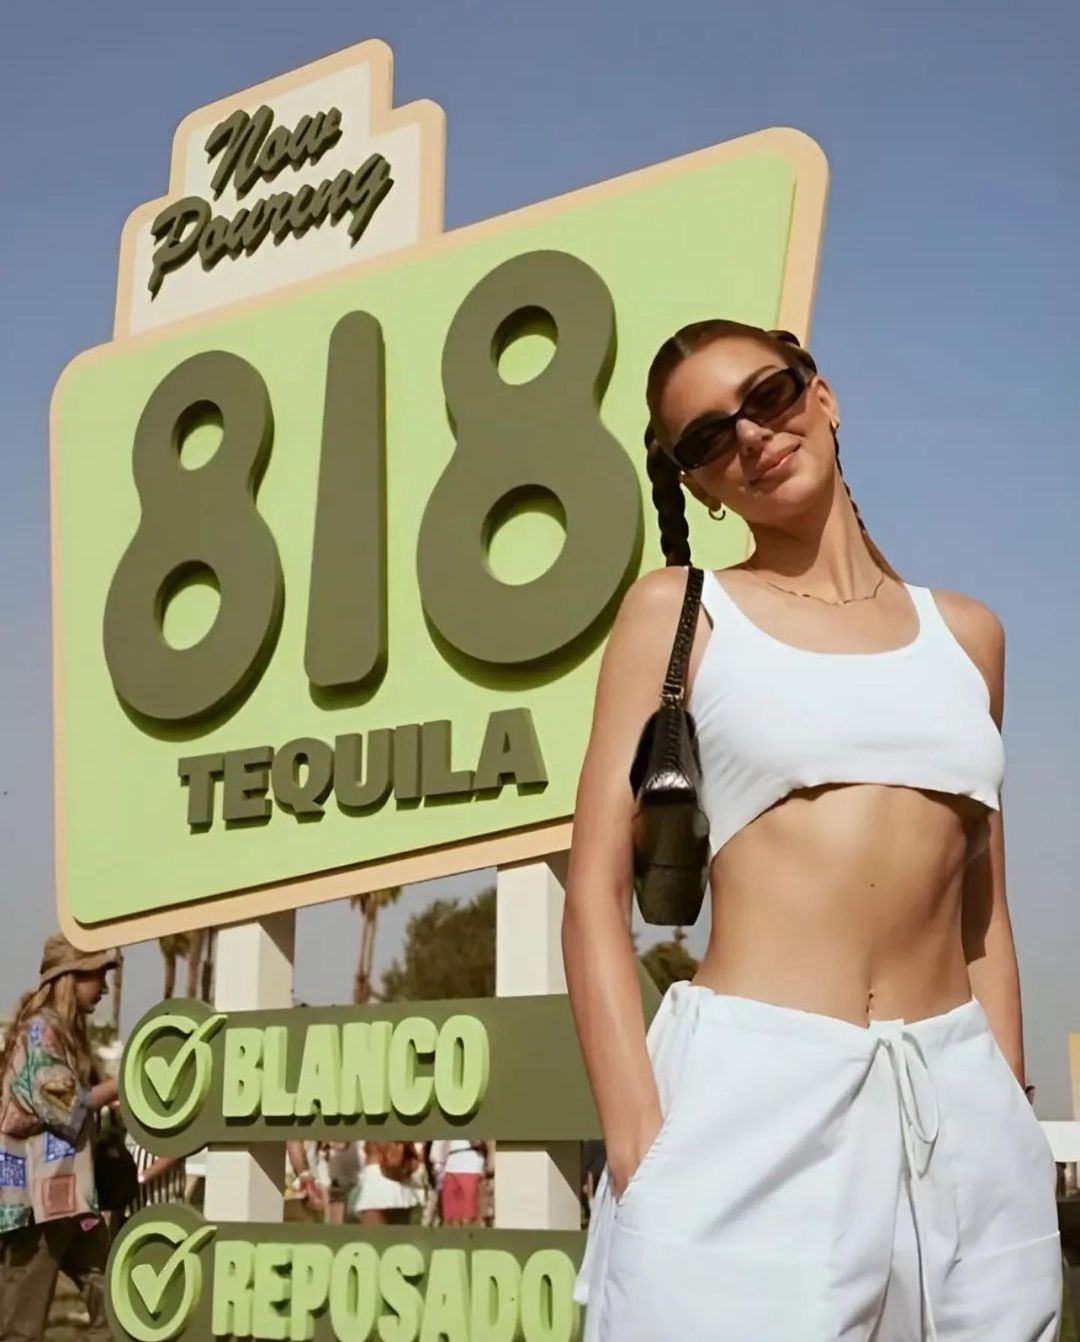 Kendall Jenner posing in front of a custom fabricated 818 Tequila sign for Revolve Festival.